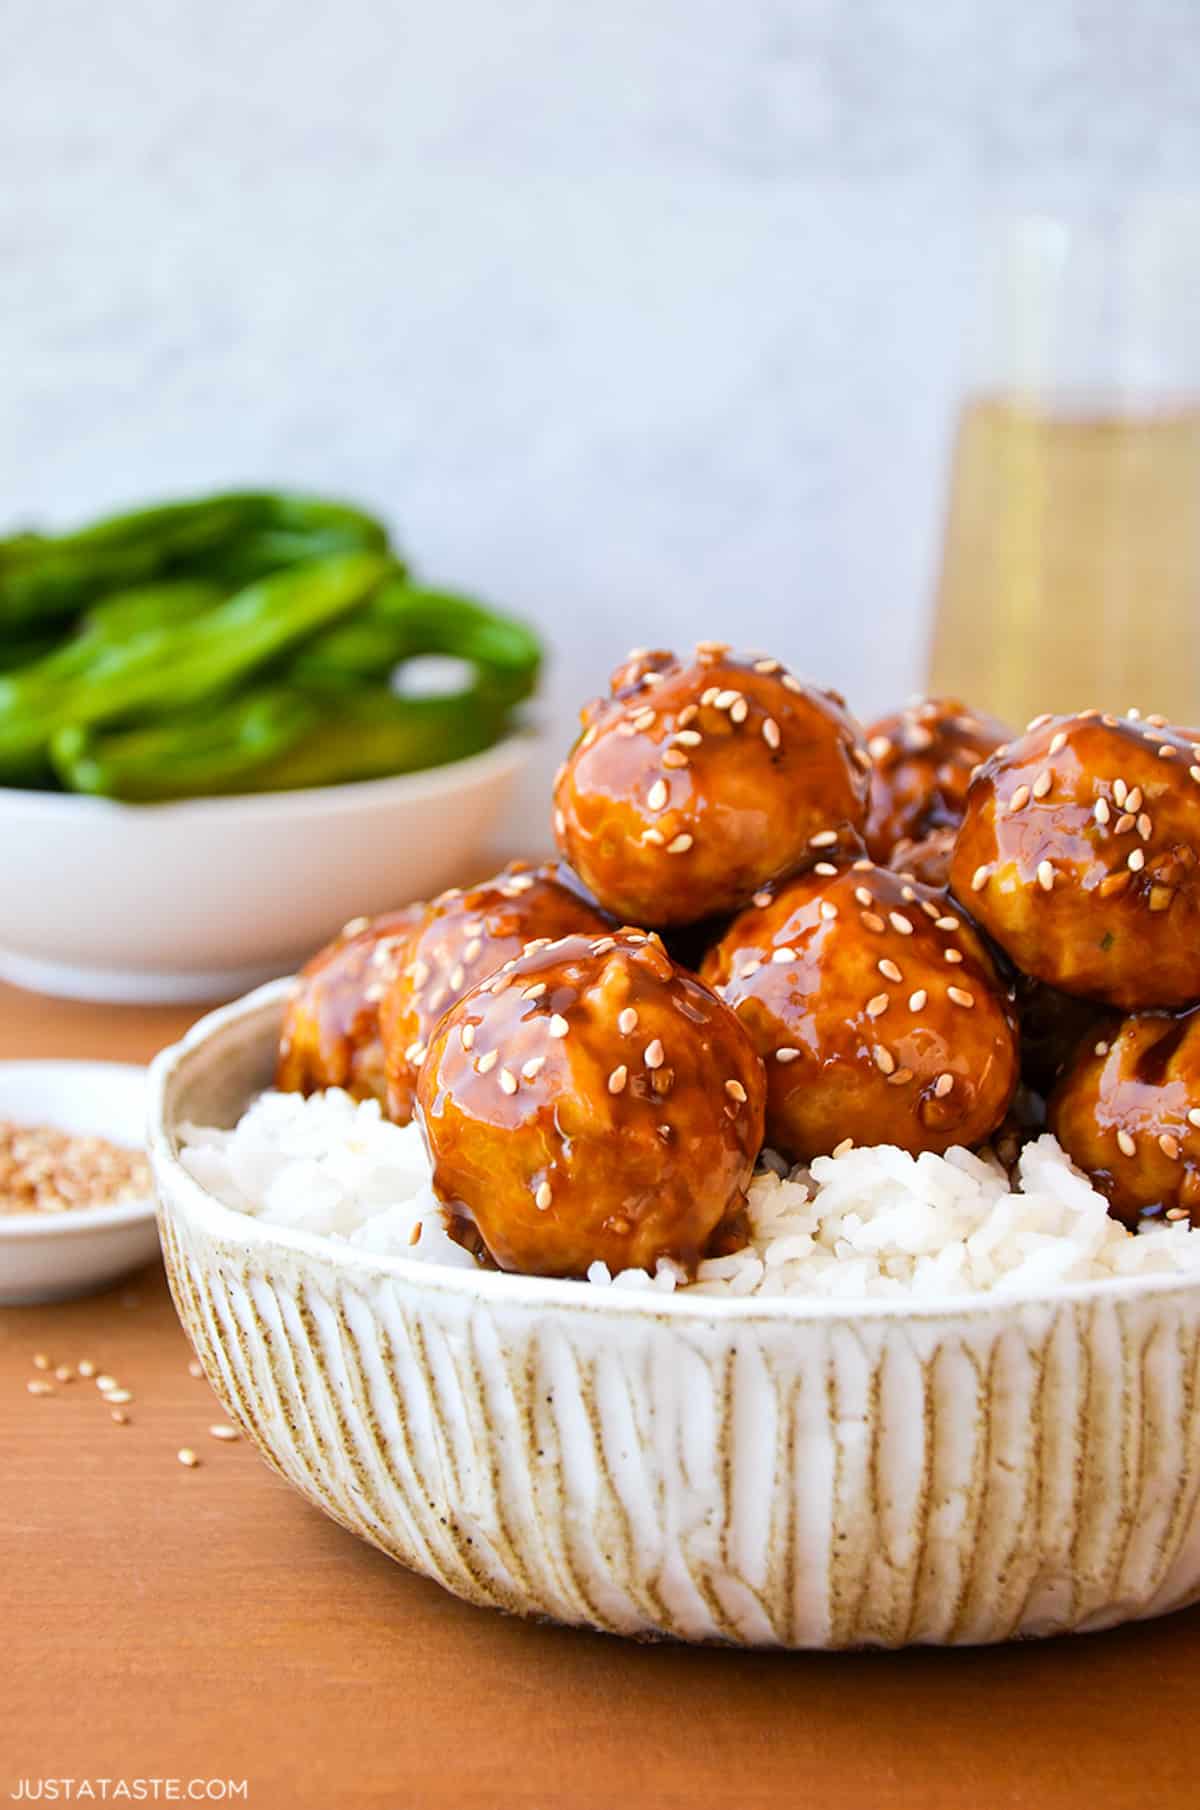 A dinner bowl containing baked chicken teriyaki meatballs on top of white rice and sprinkled with sesame seeds.